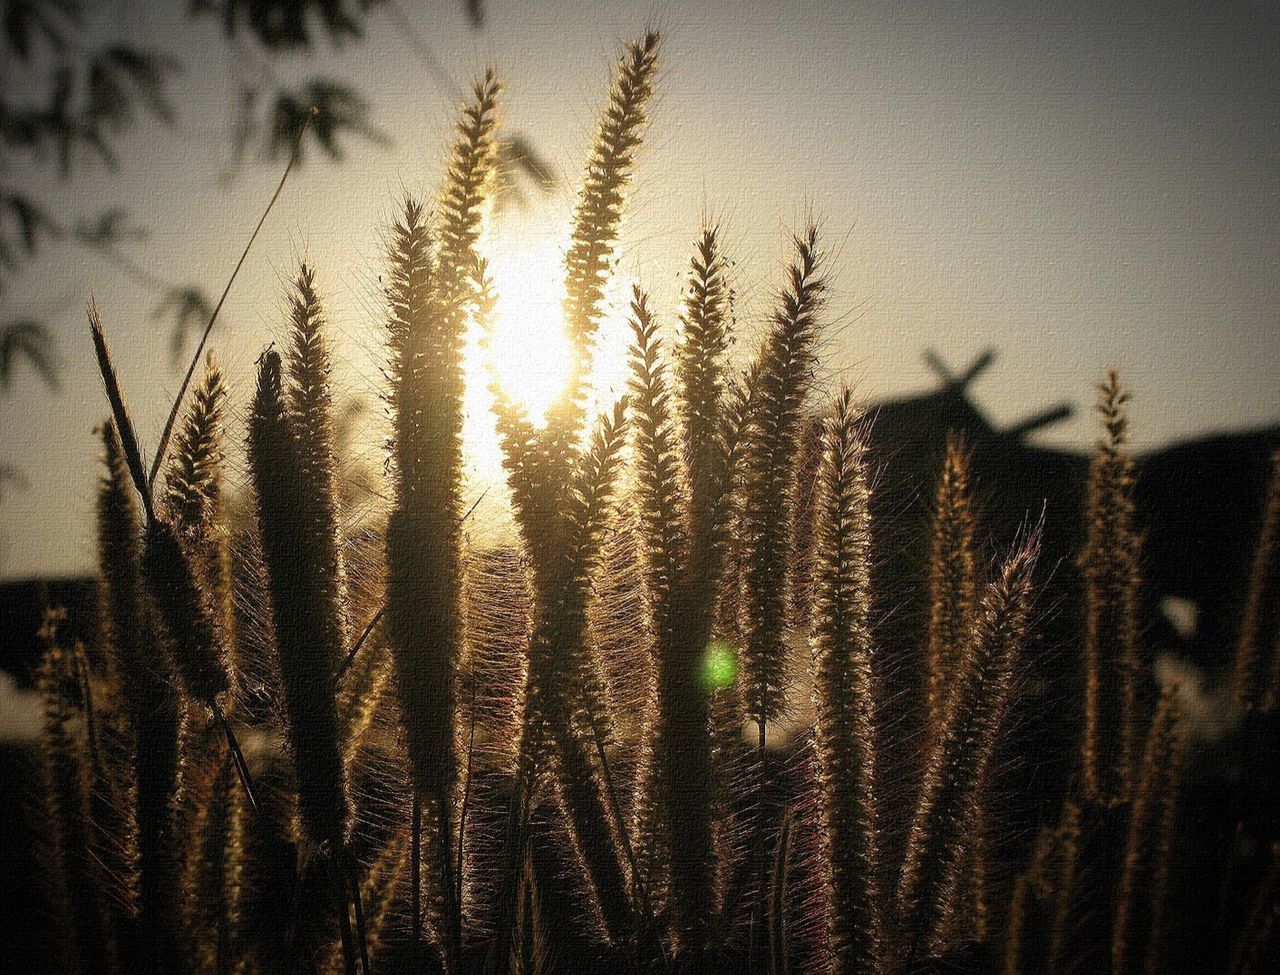 Plants growing against bright sky during sunset